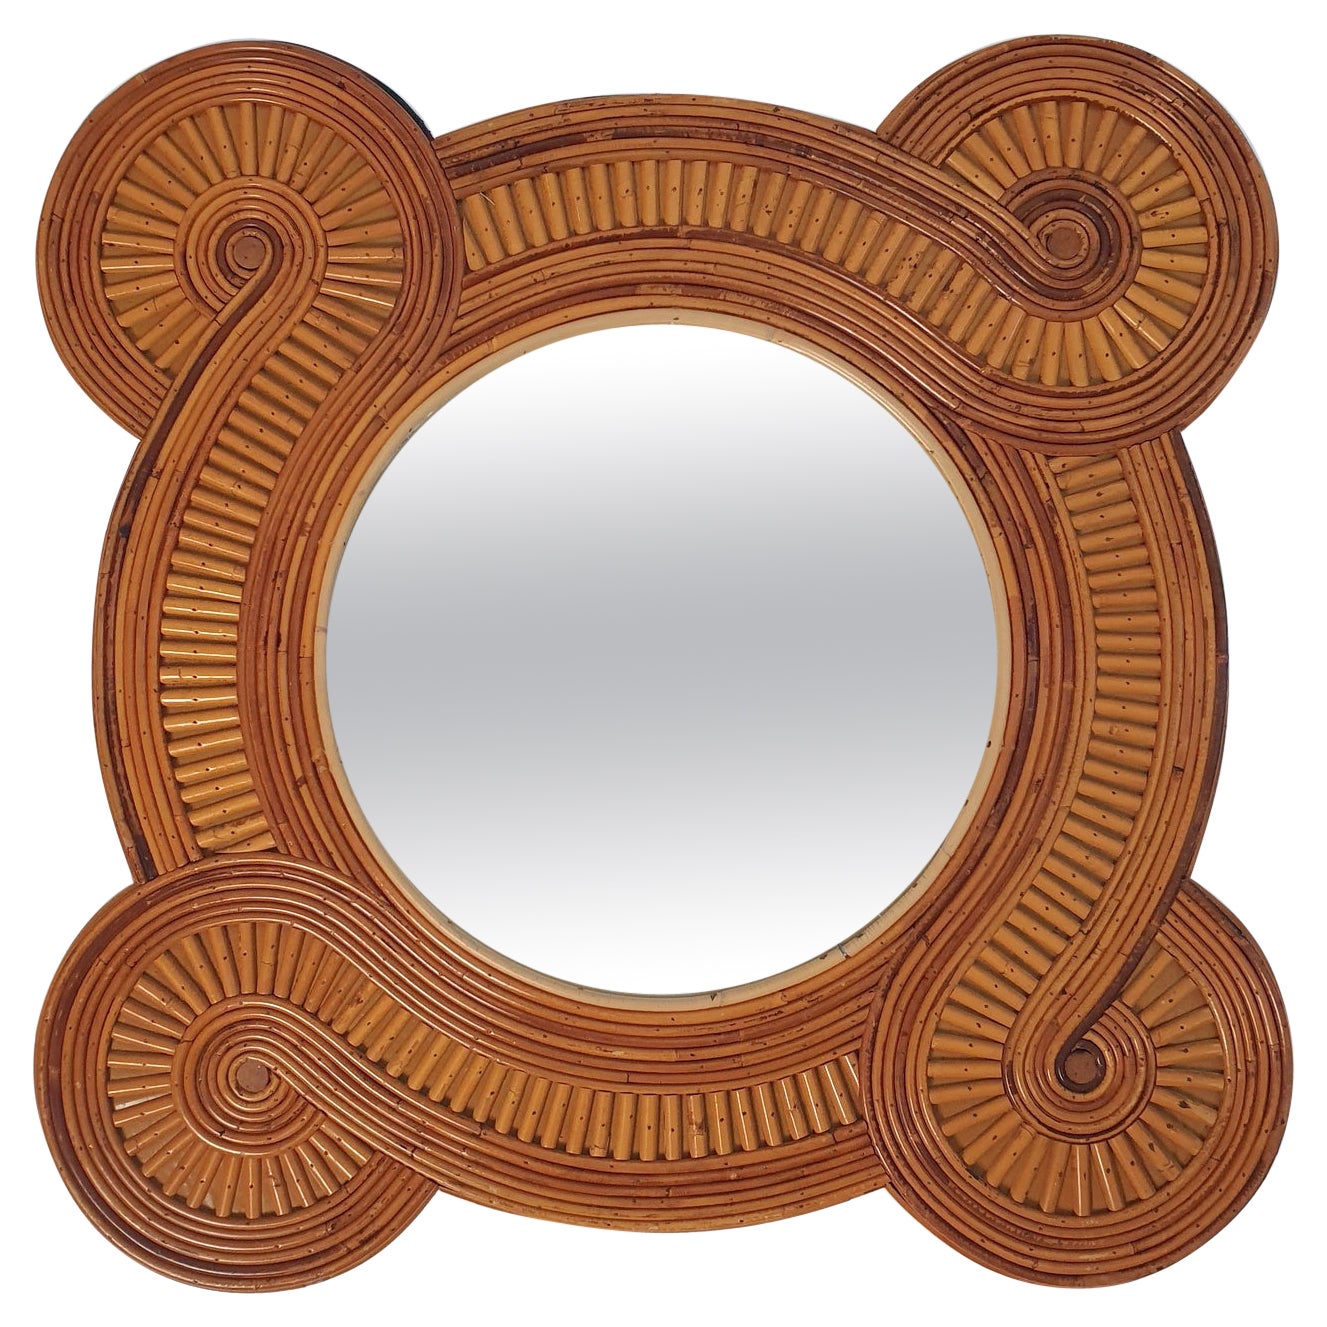 Bamboo Mirror by Vivai del Sud Italy, 1960s